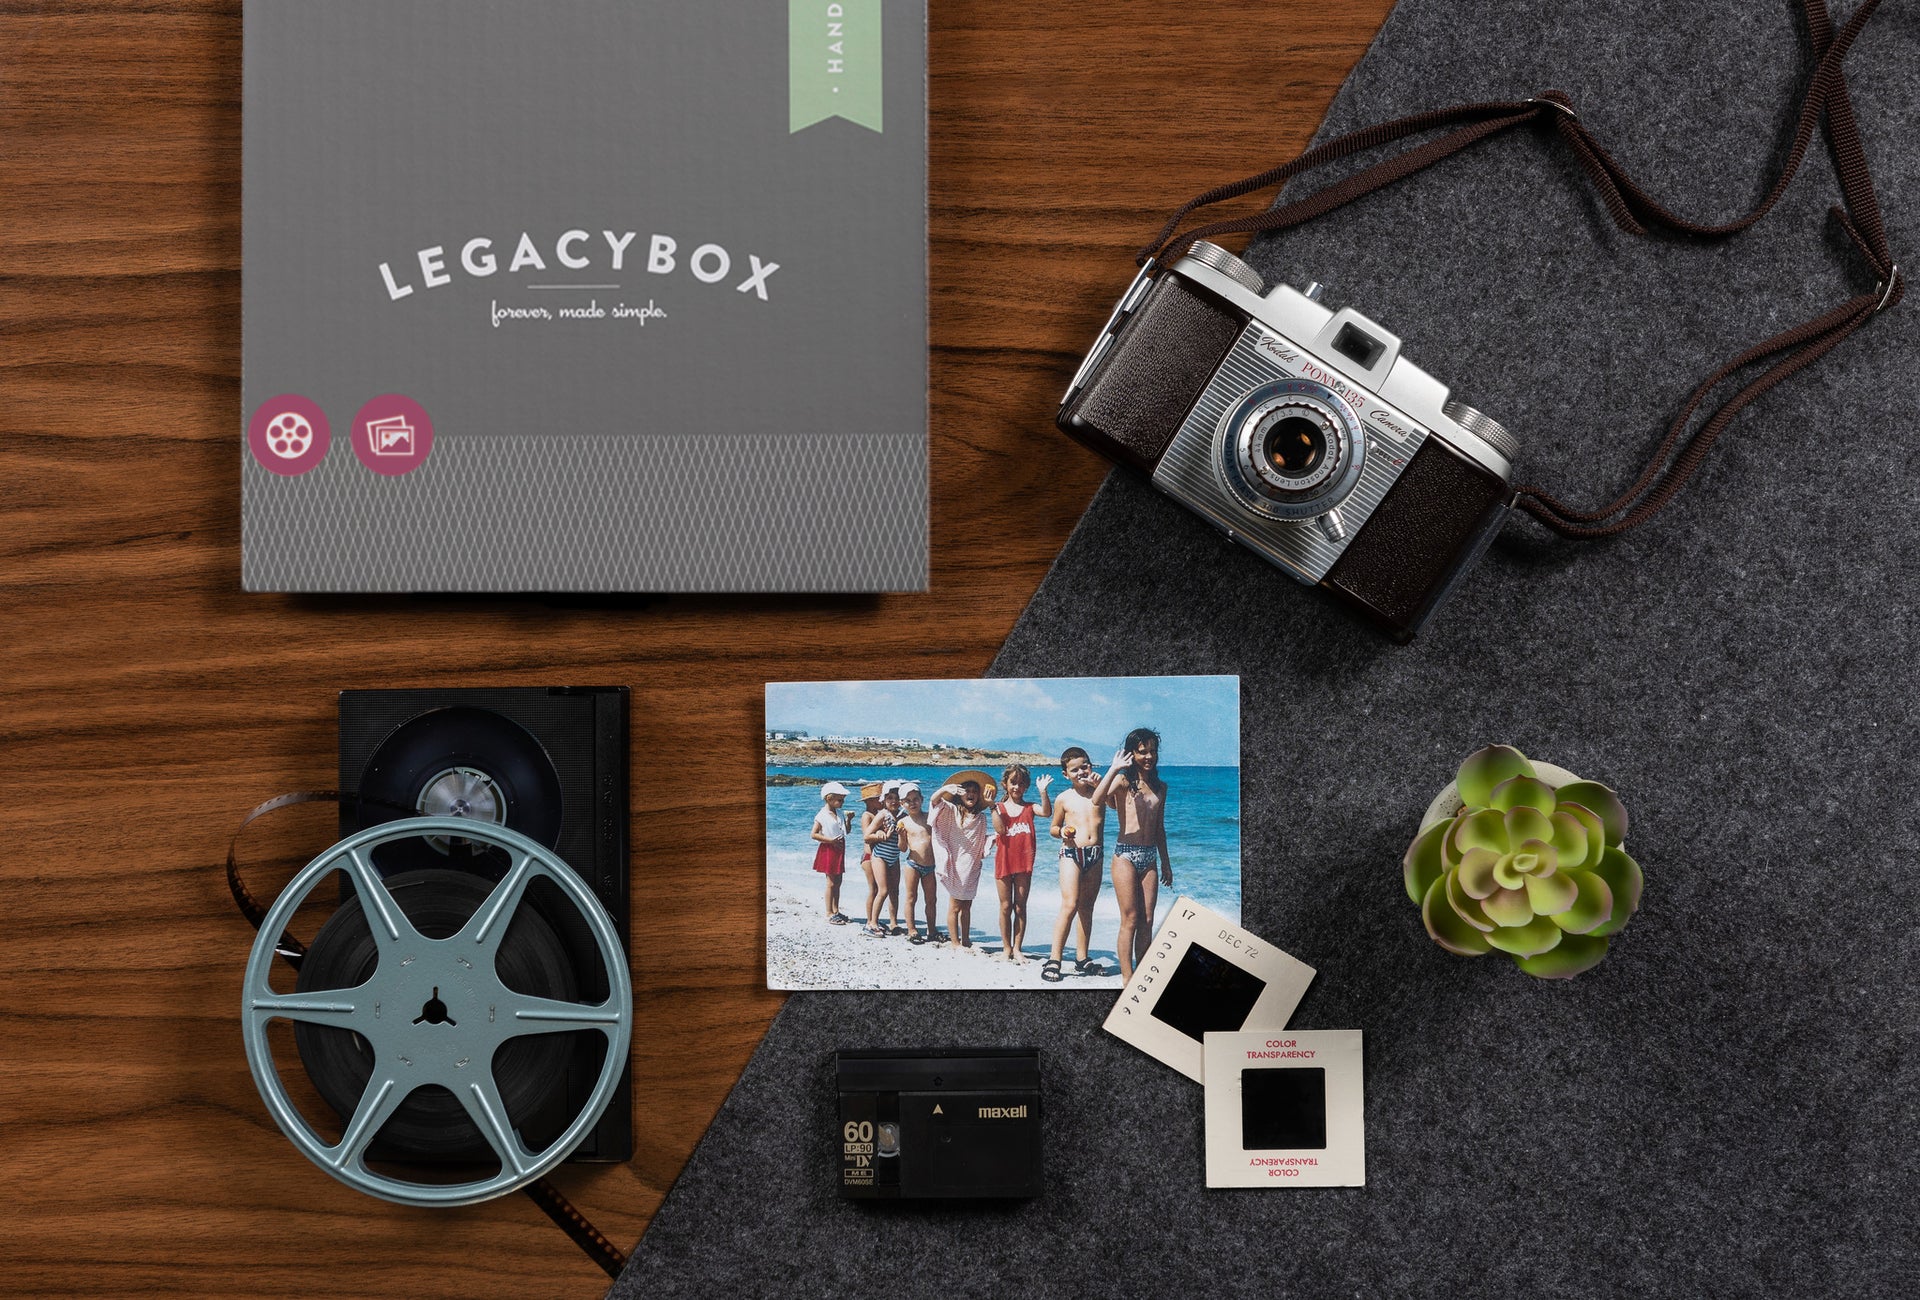 Competitors Compared to Legacybox Video Transfer Service